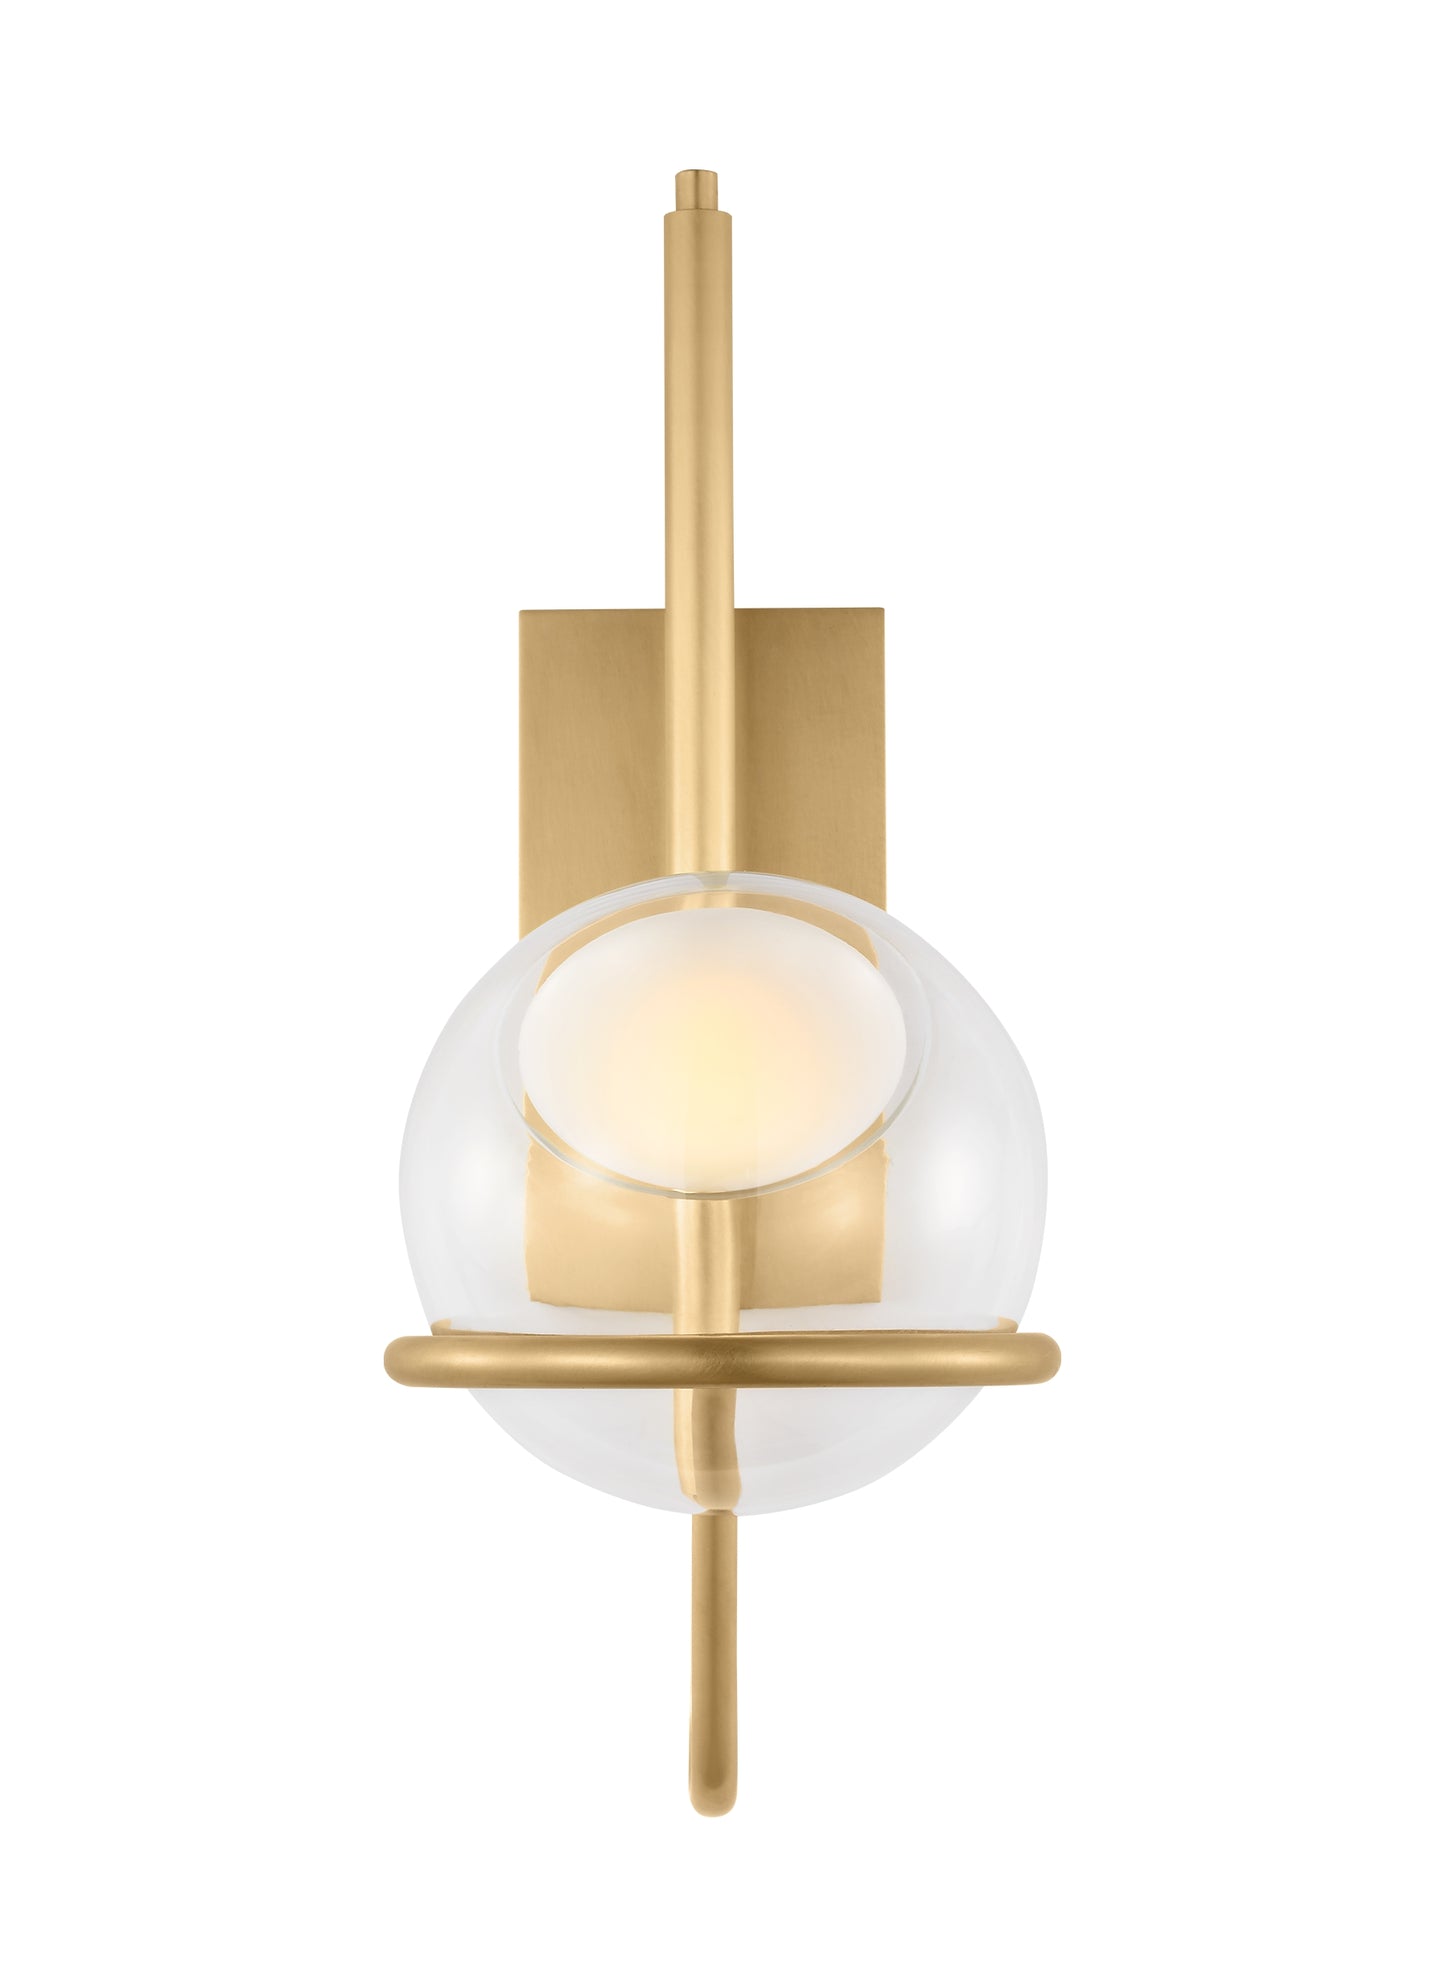 Crosby Medium Decorative Wall Sconce with Globe Glass - Natural Brass